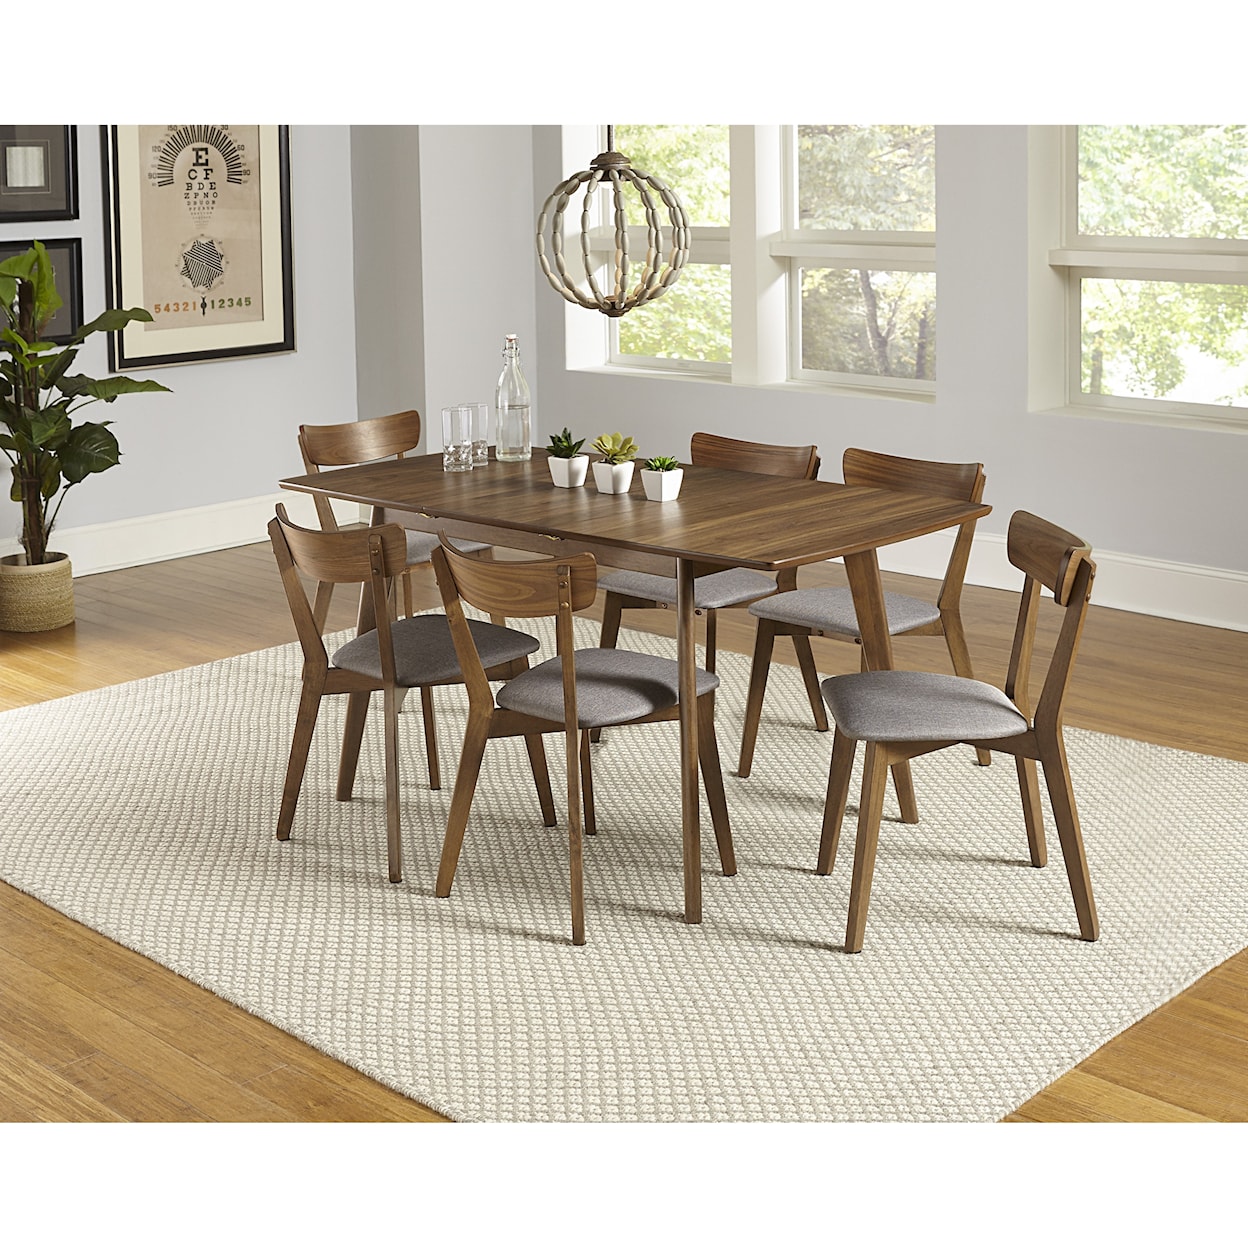 Carolina Chairs Arcade 7-Piece Butterfly Table Set